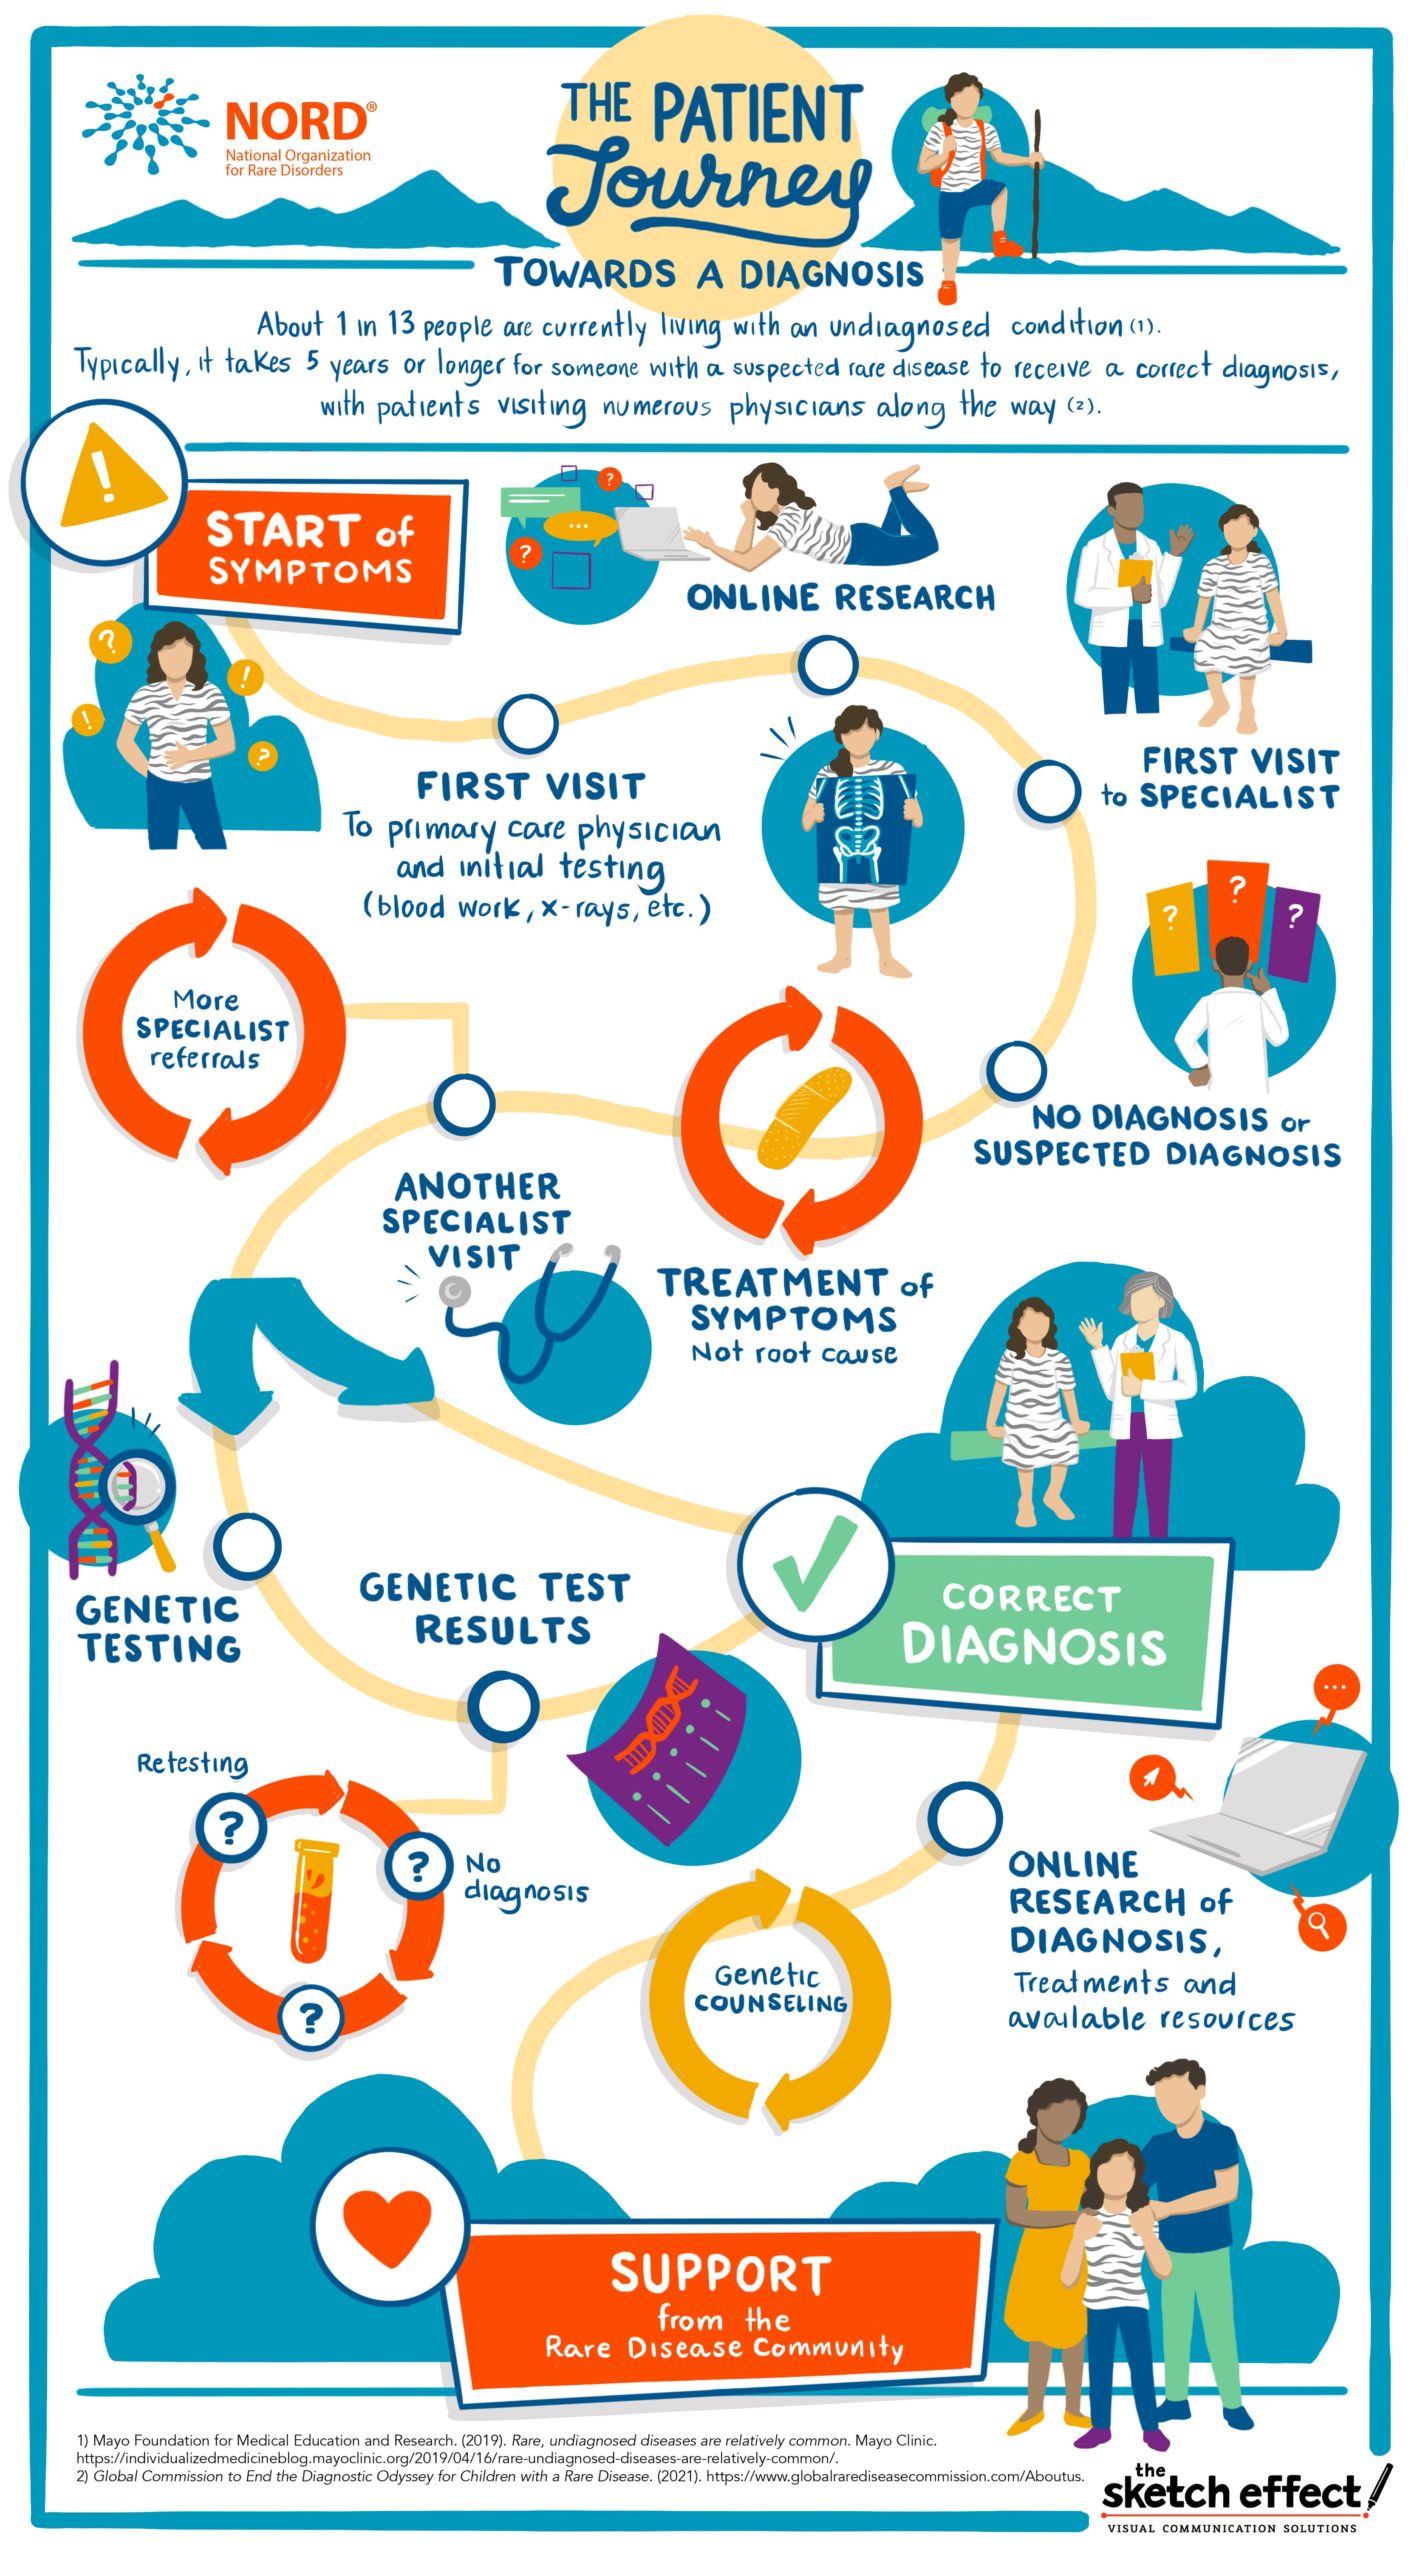 New Patient Journey Infographic Gives A Glimpse Into The Diagnostic